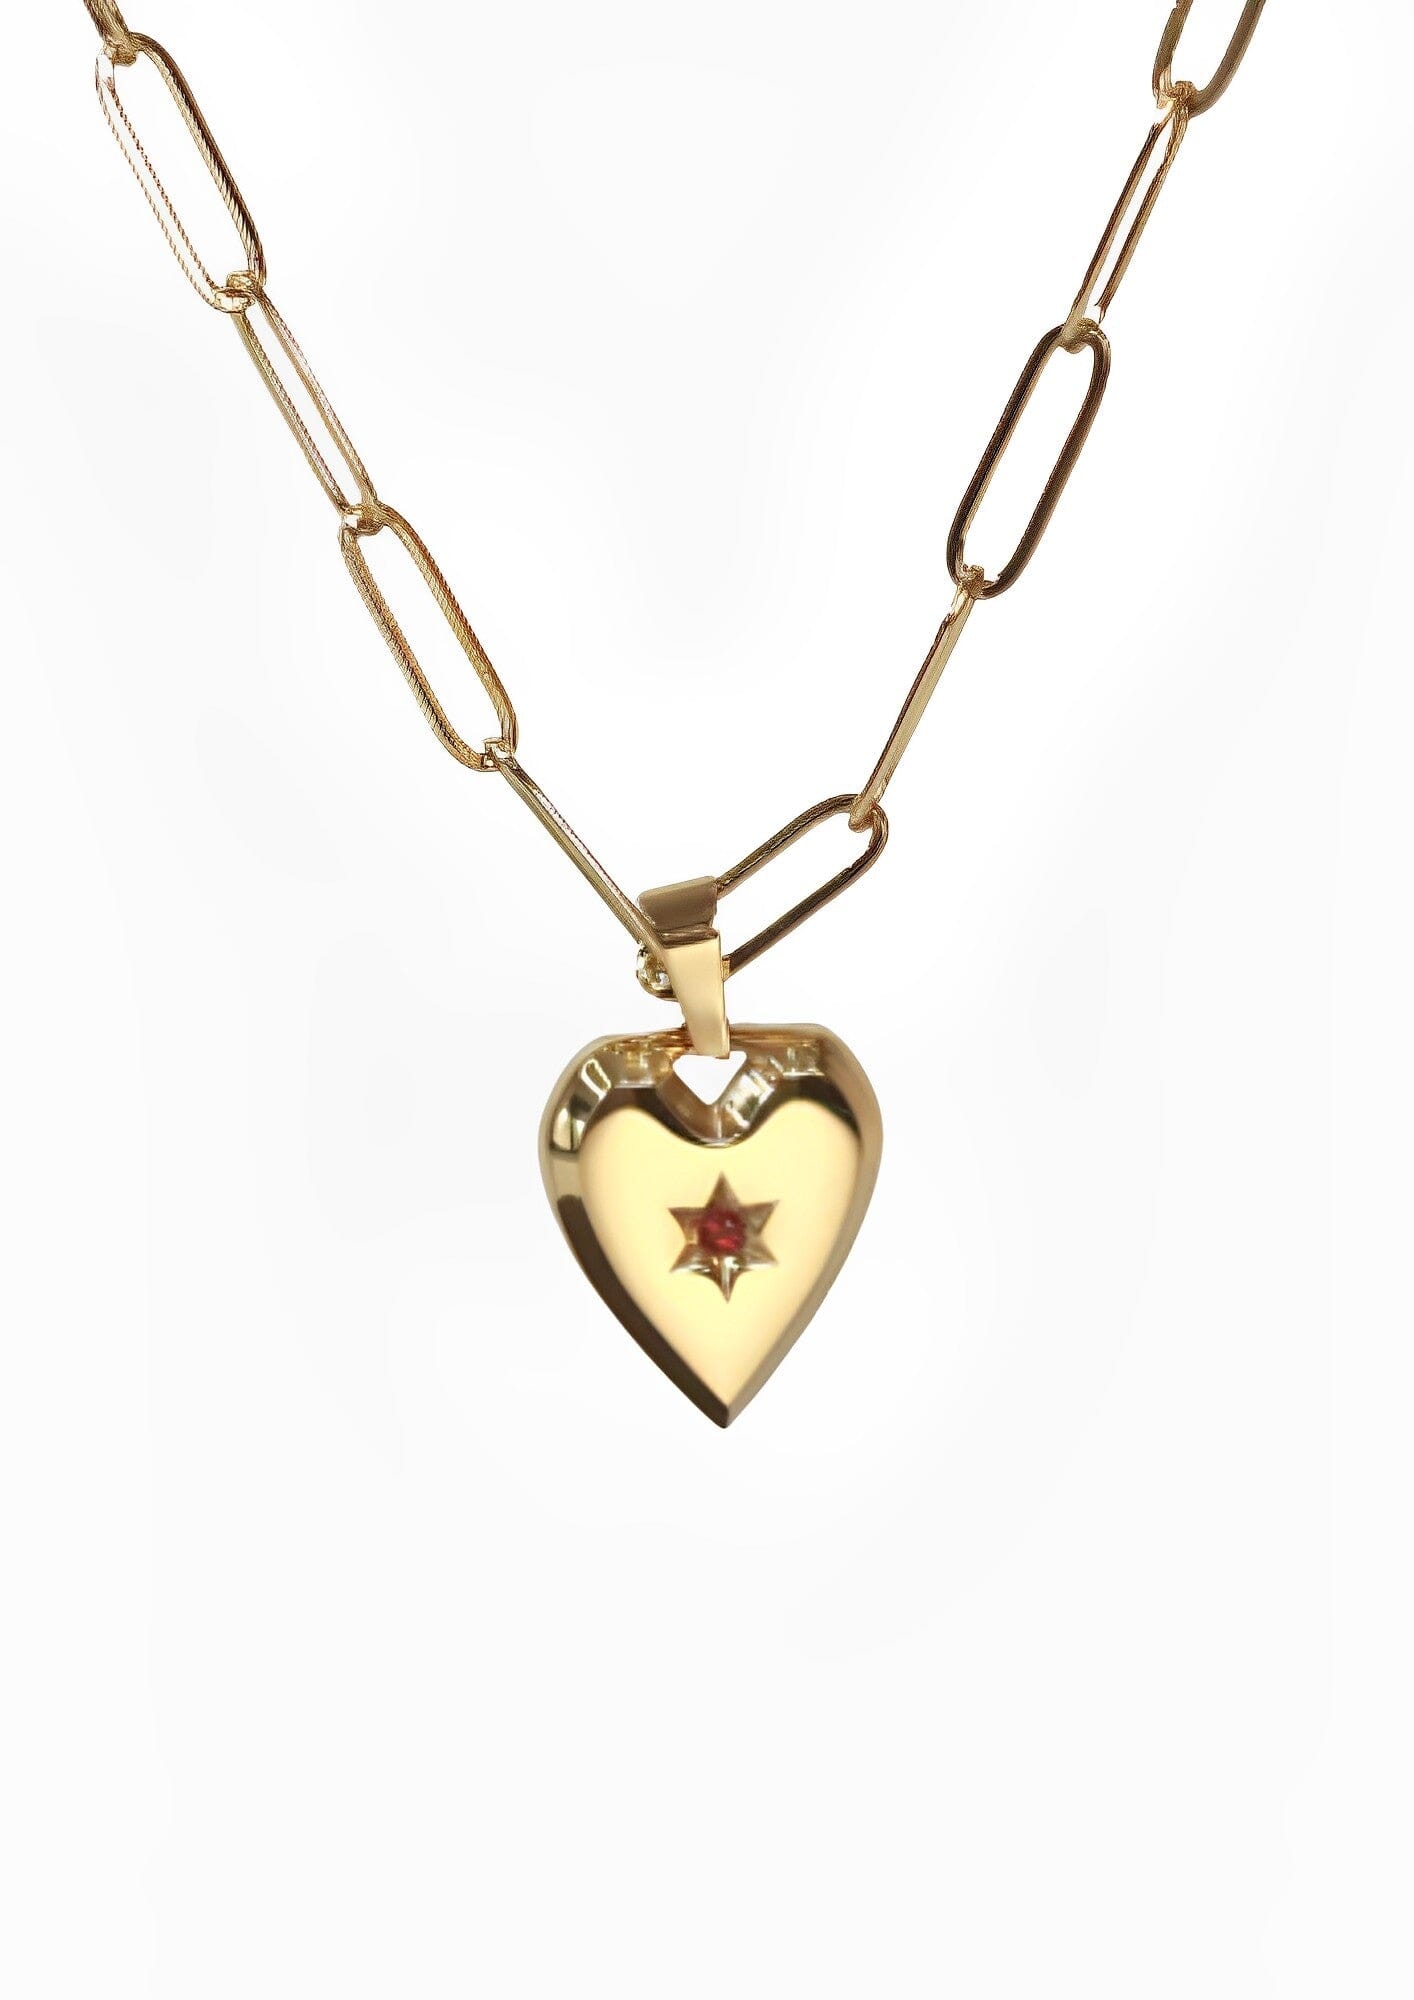 PEACH HEART NECKLACE neck Yubama Jewelry Online Store - The Elegant Designs of Gold and Silver ! 